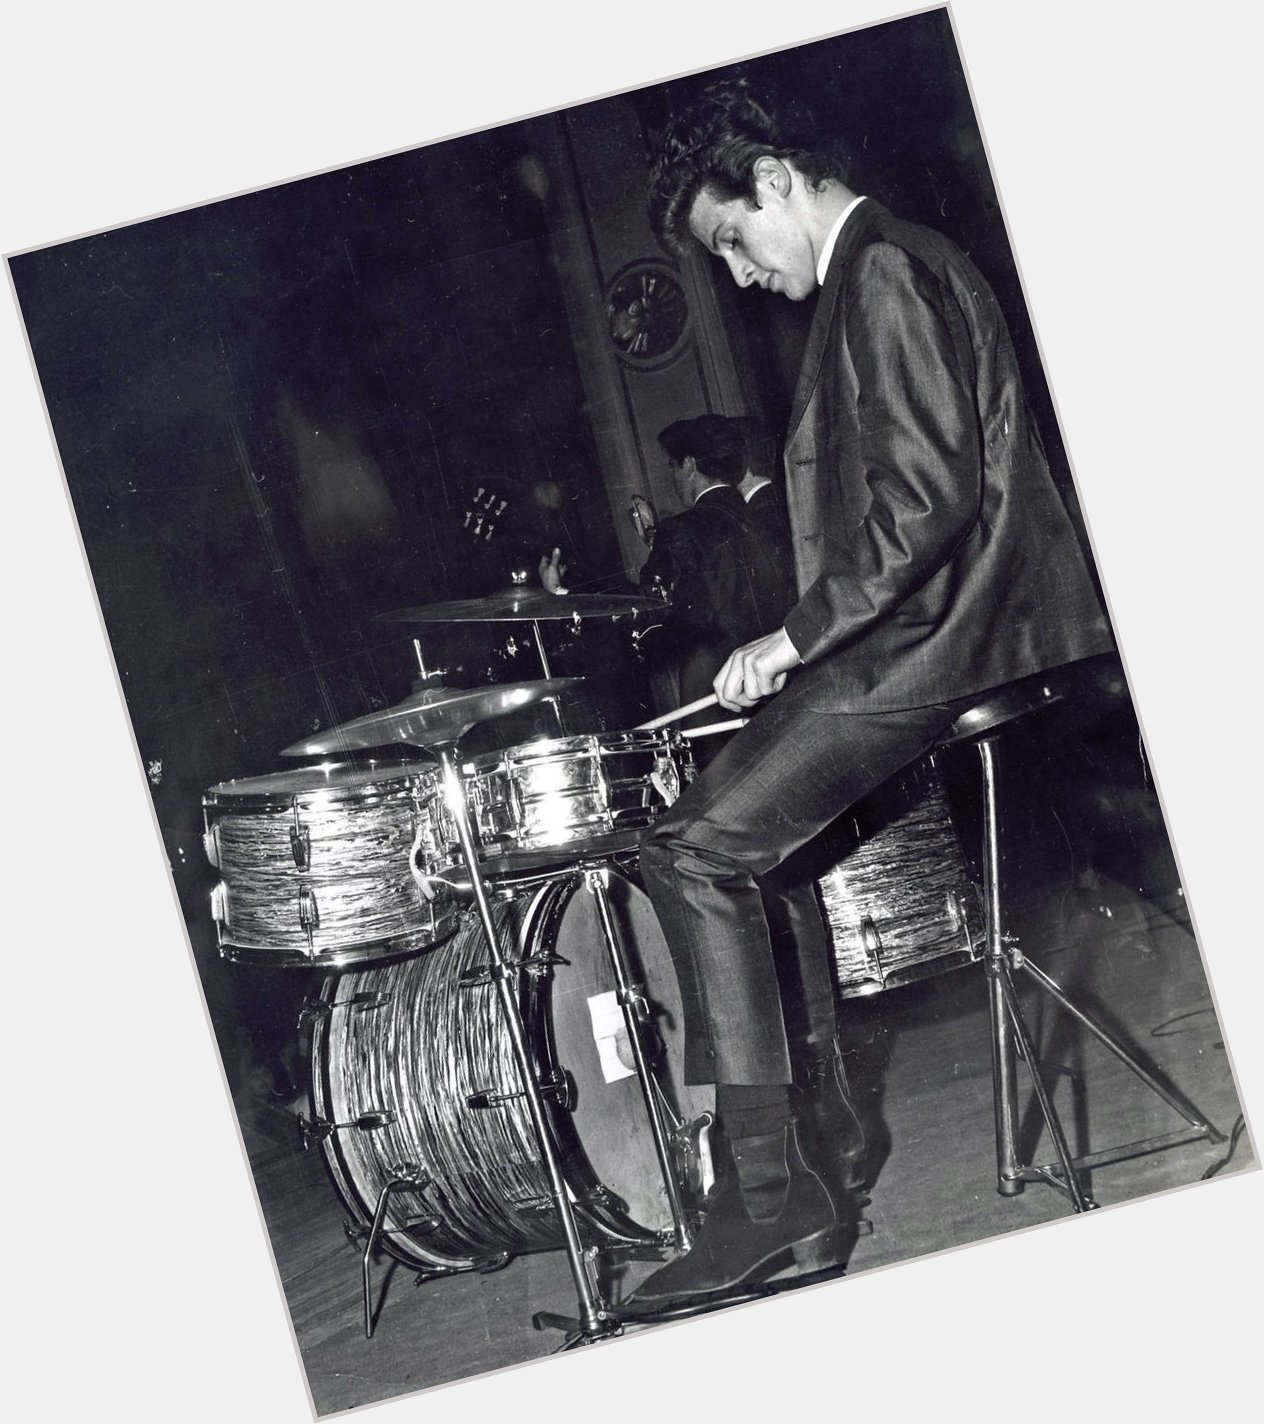 Happy birthday to Pete Best, who turns 80 today!

(Image credit Alamy) 